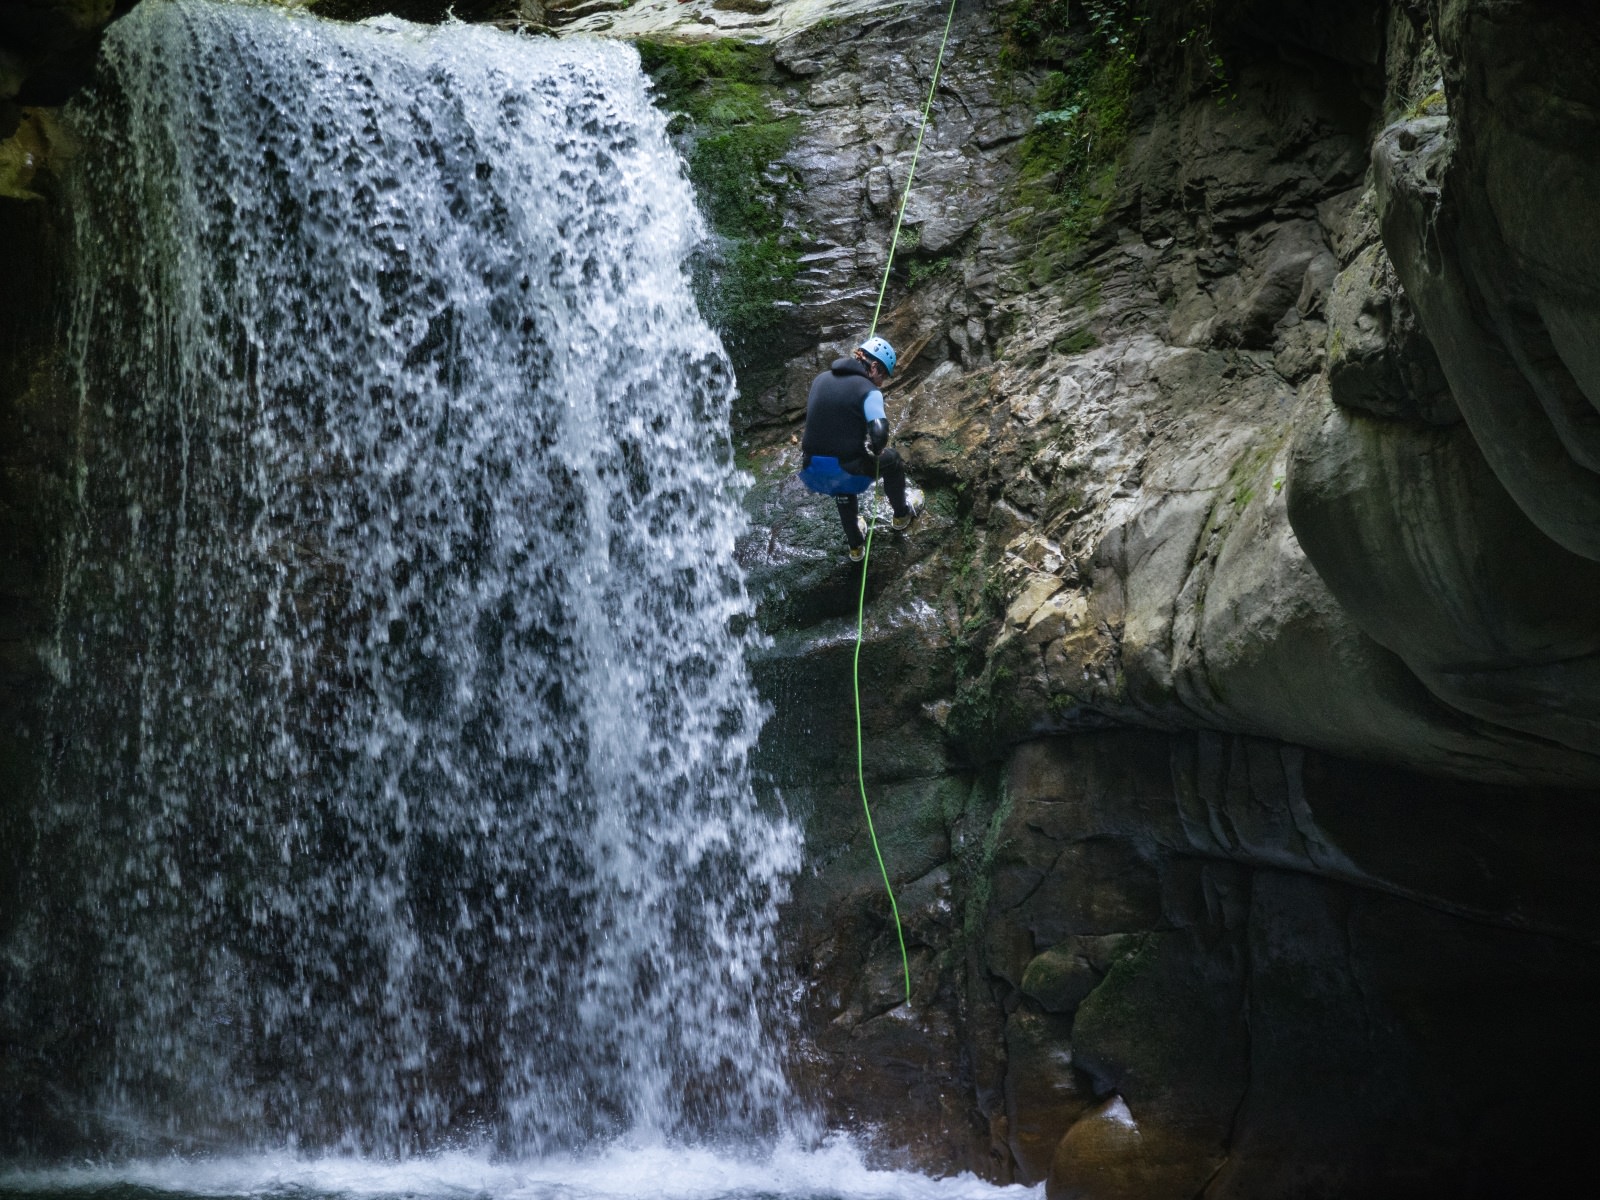 Canyoning at 2 hours from the Basque Country